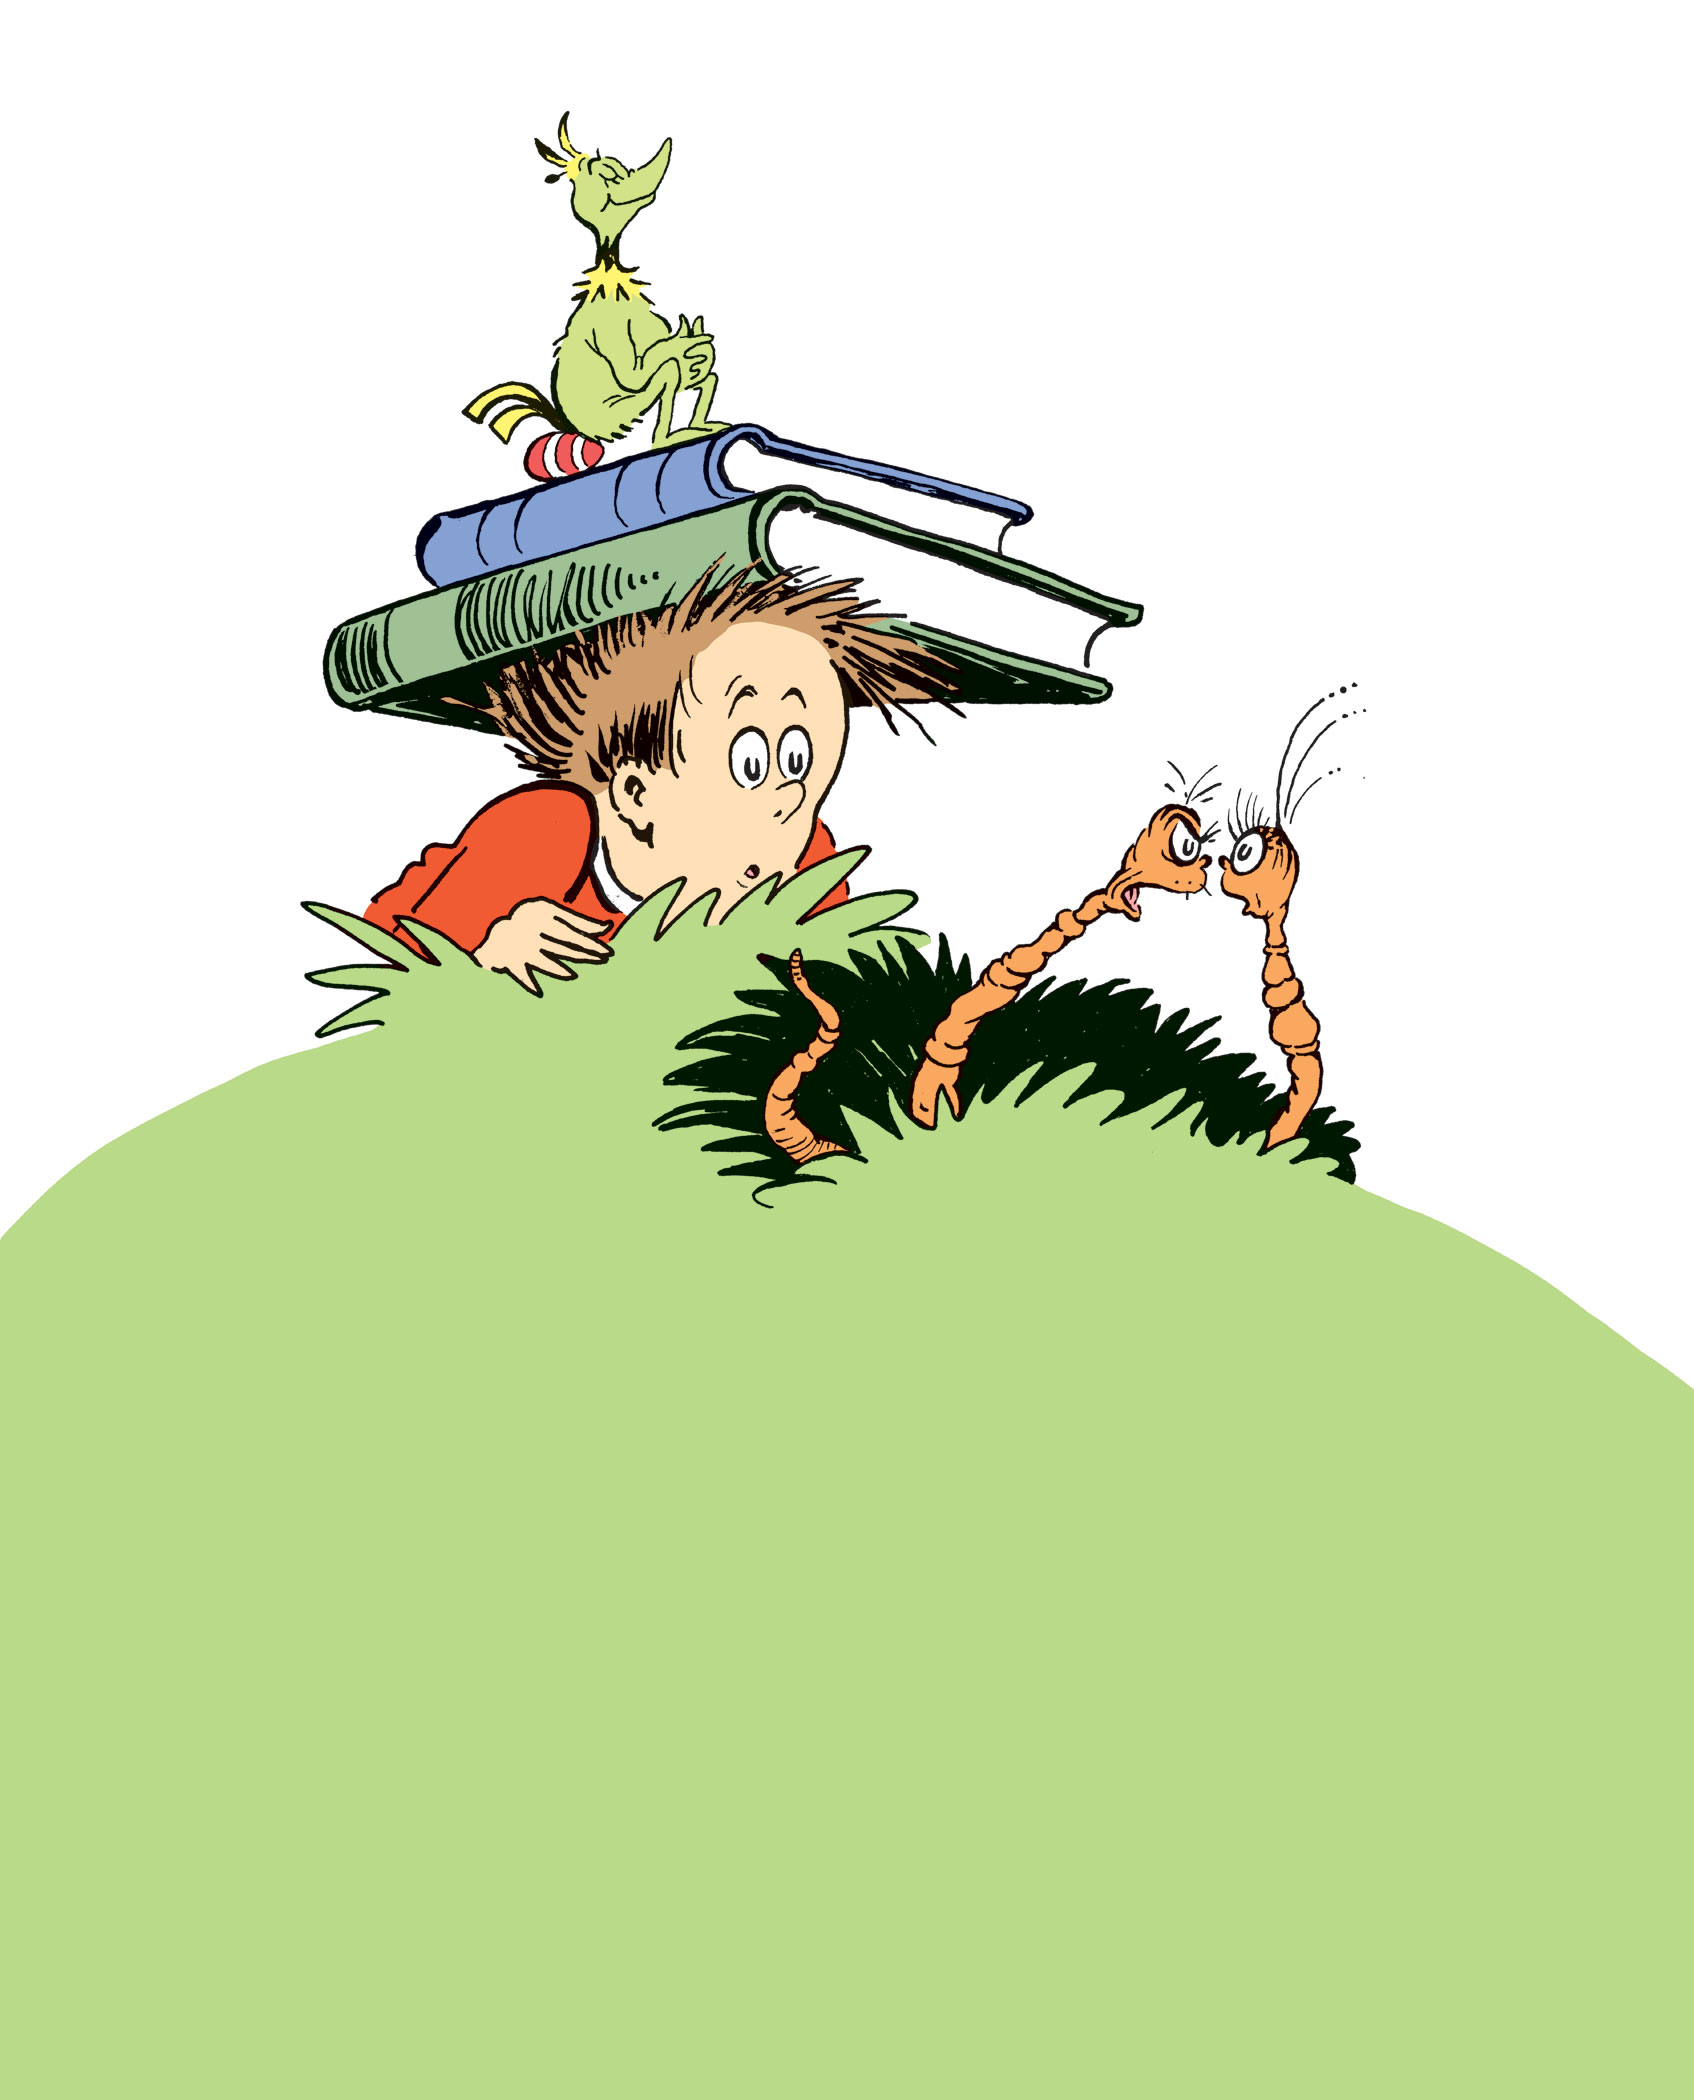 An illustration from Horton and the Kwuggerbug and More Lost Stories by Dr. Seuss